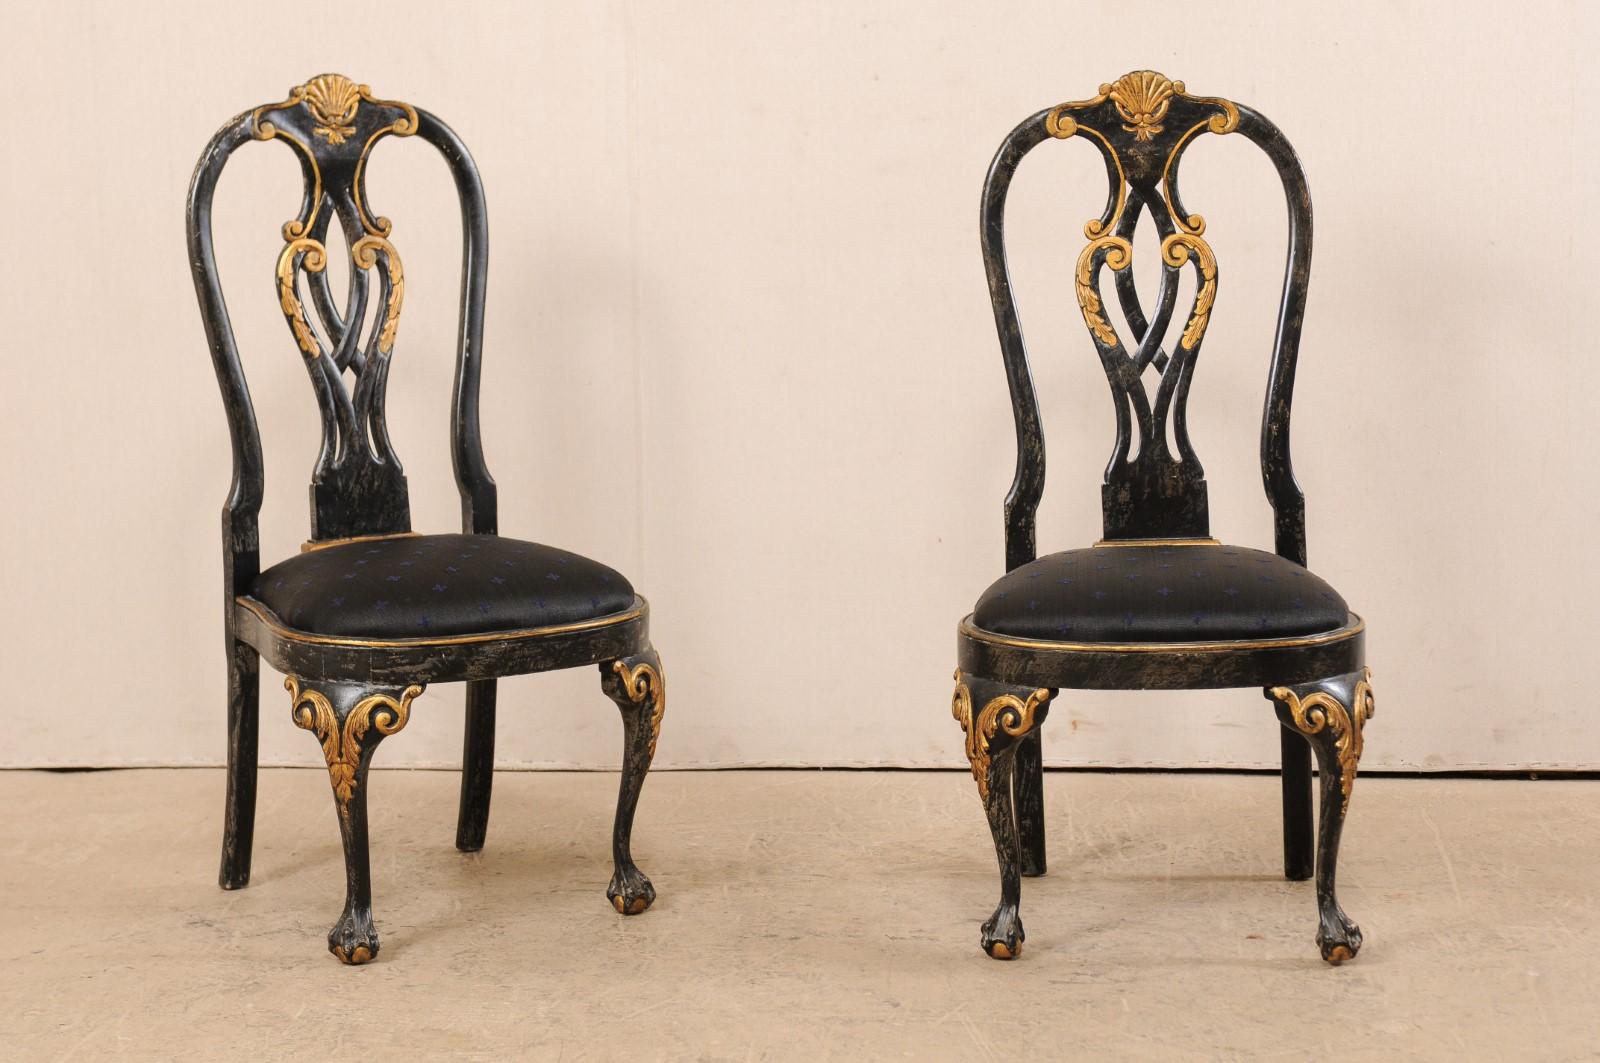 Carved Set of 6 Portuguese-Style Pierced Splat Back Dining Side Chairs, Black & Gold